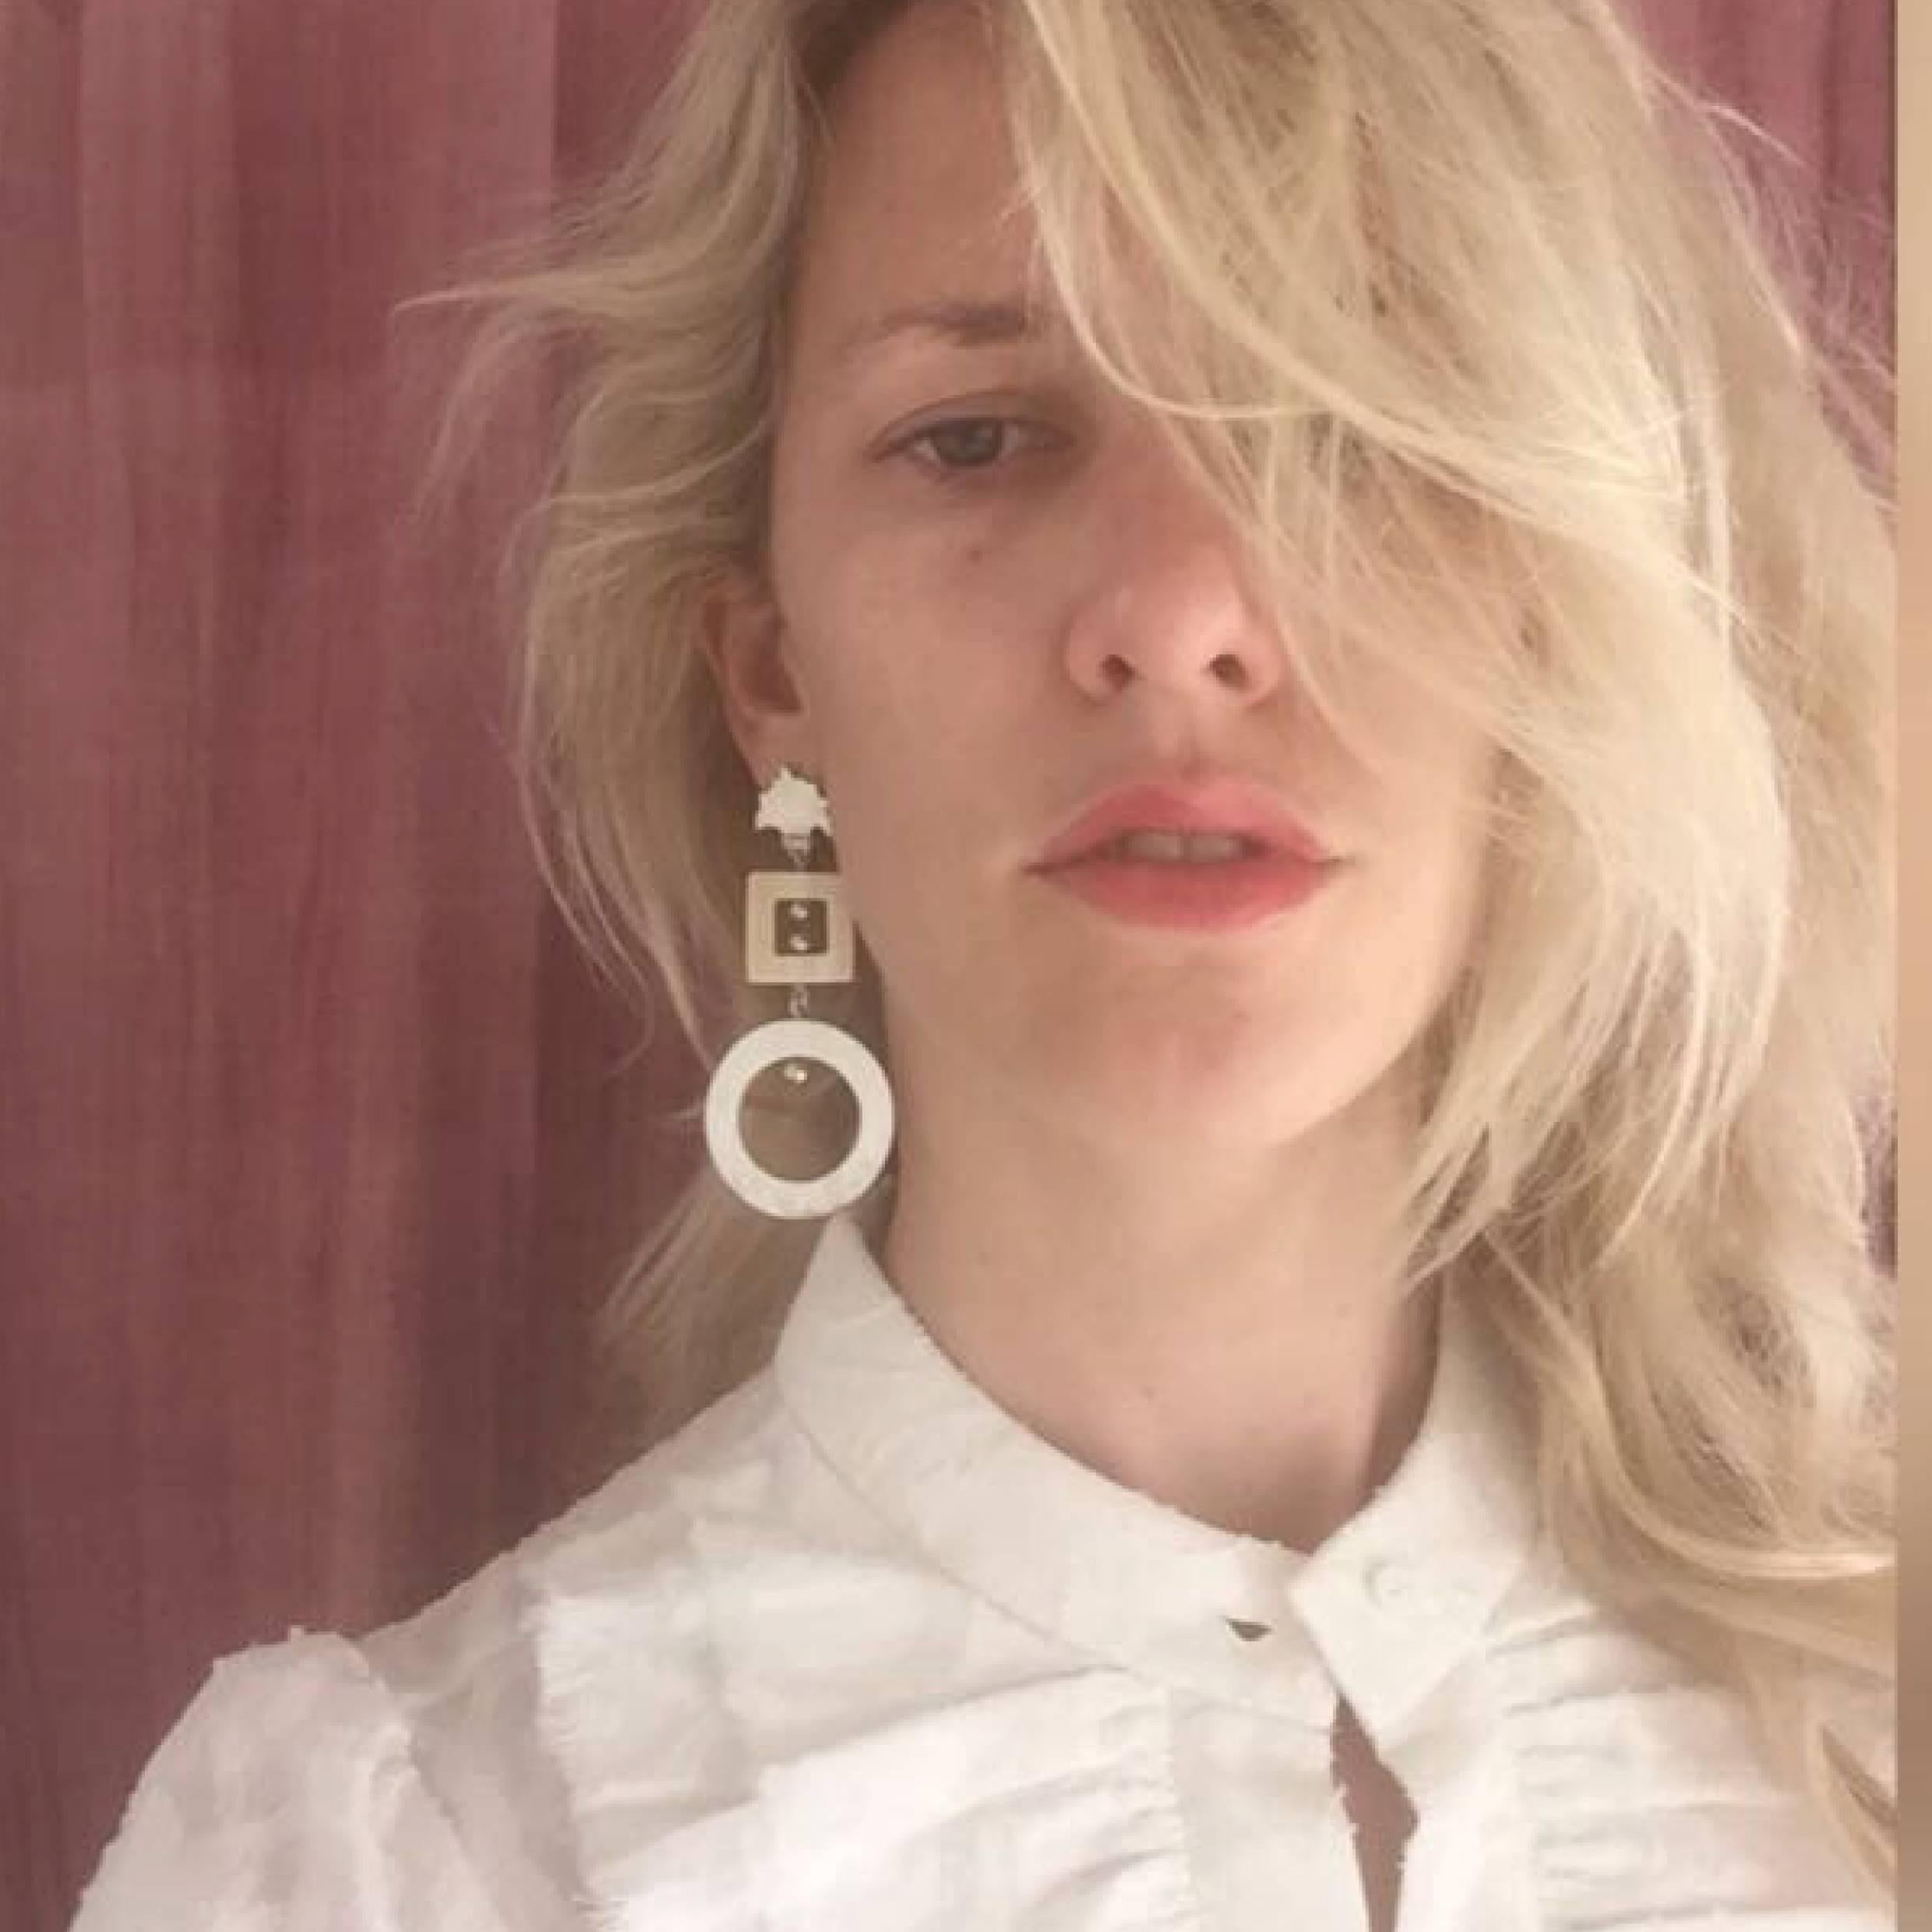 These unique earrings are hand crafted from African cow horn and finished by hand in London with precious silver. The design is inspired by Art Deco buildings in Africa. 

Earrings are handmade from natural materials with sterling silver pin-backs.